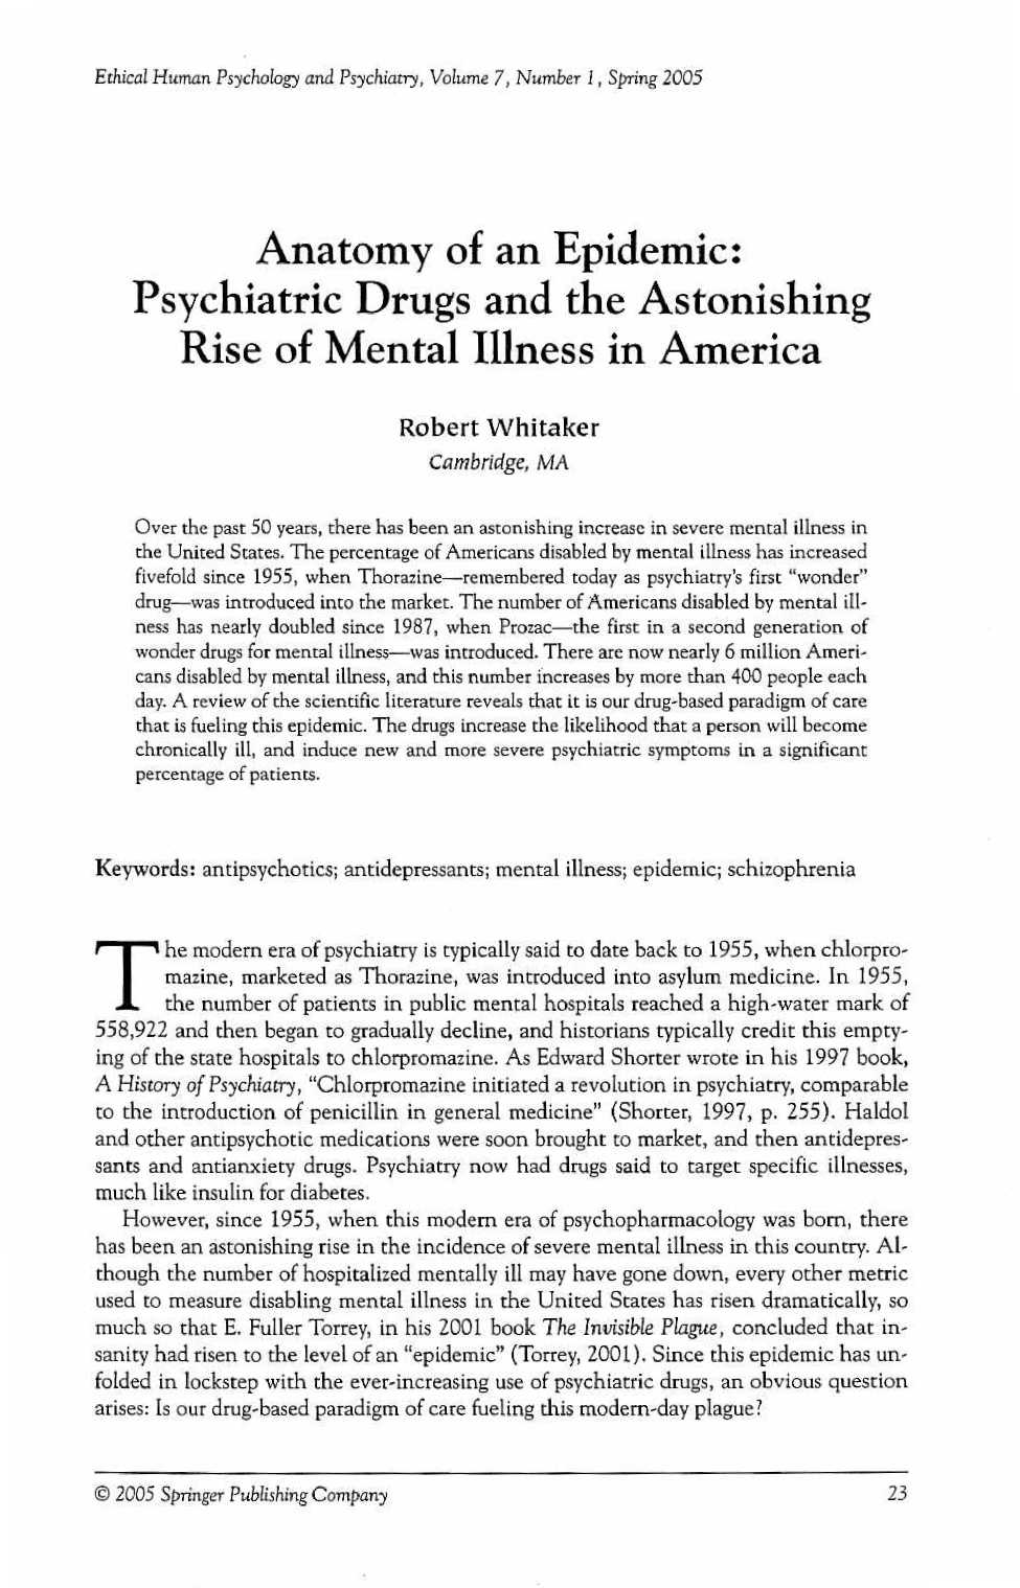 Anatomy of an Epidemic: Psychiatric Drugs and the Astonishing Rise of Mental Illness in America